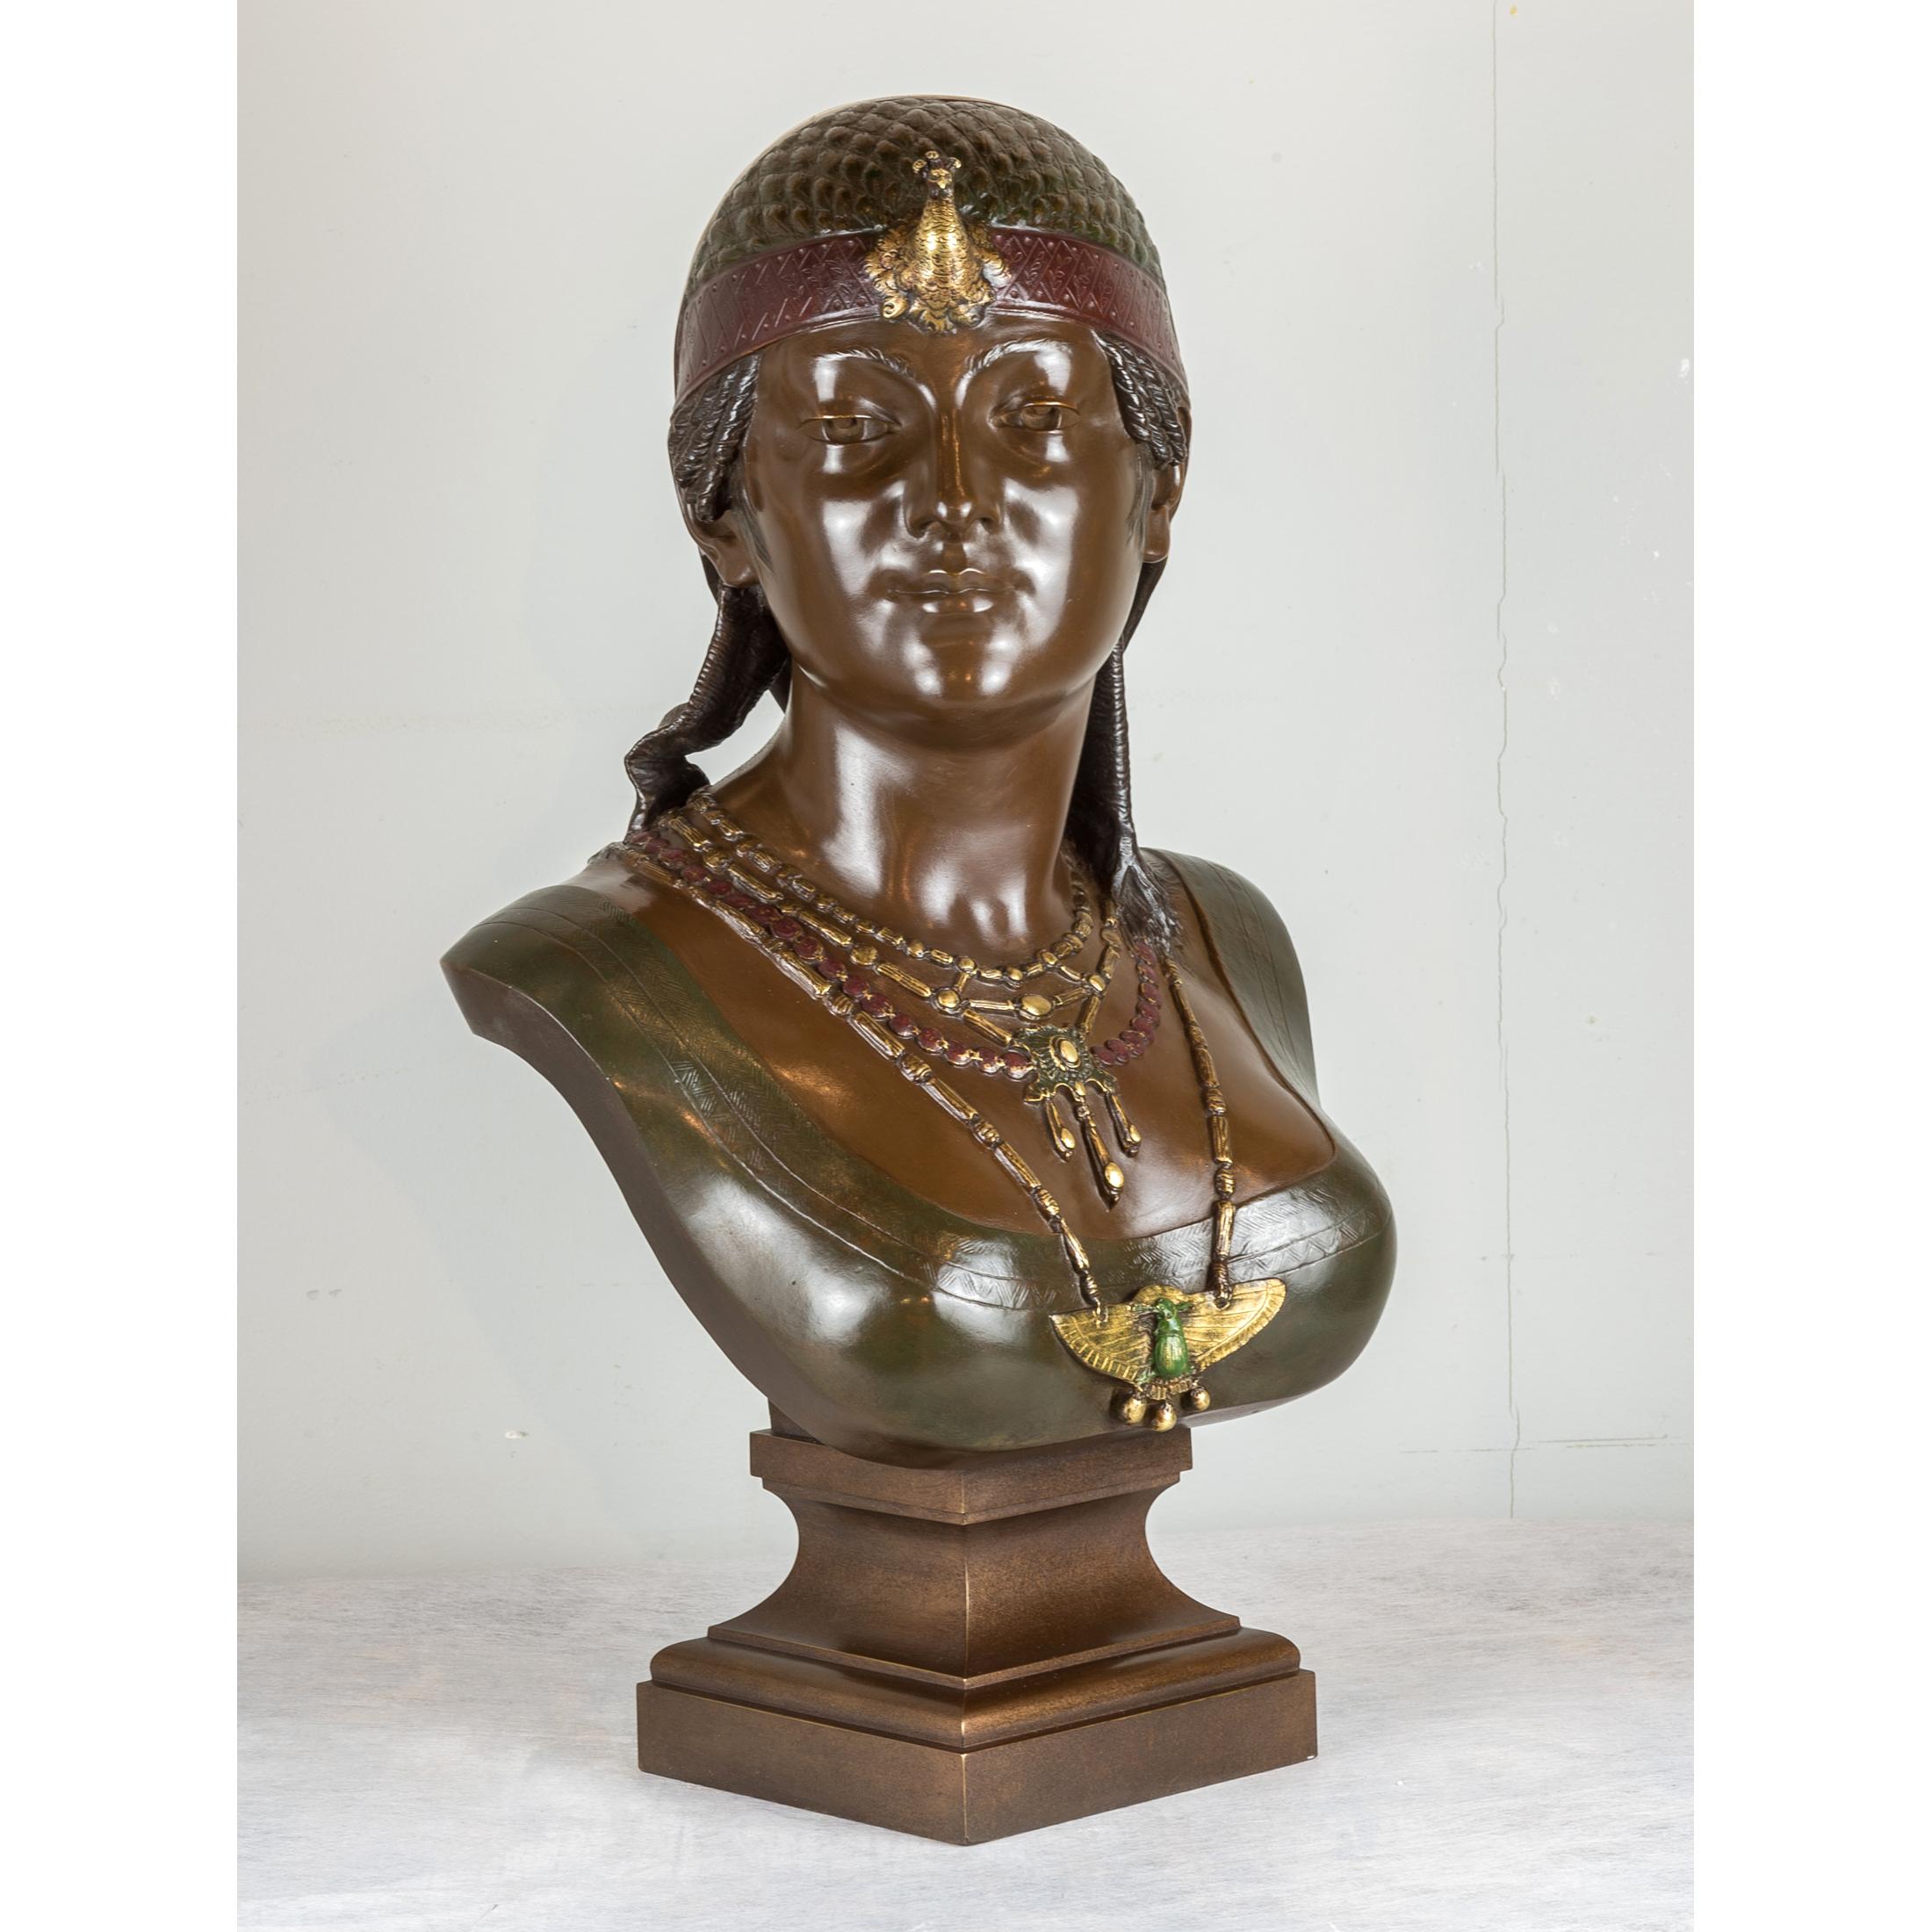 Fine quality patinated bronze bust of Cleopatra signed: ‘C. Ceribelli’

Artist: Cesar Ceribelli, (French, 1841-1918)
Date: 19th century
Dimension: 22 1/2 in. x 13 3/4 in. x 11 in.